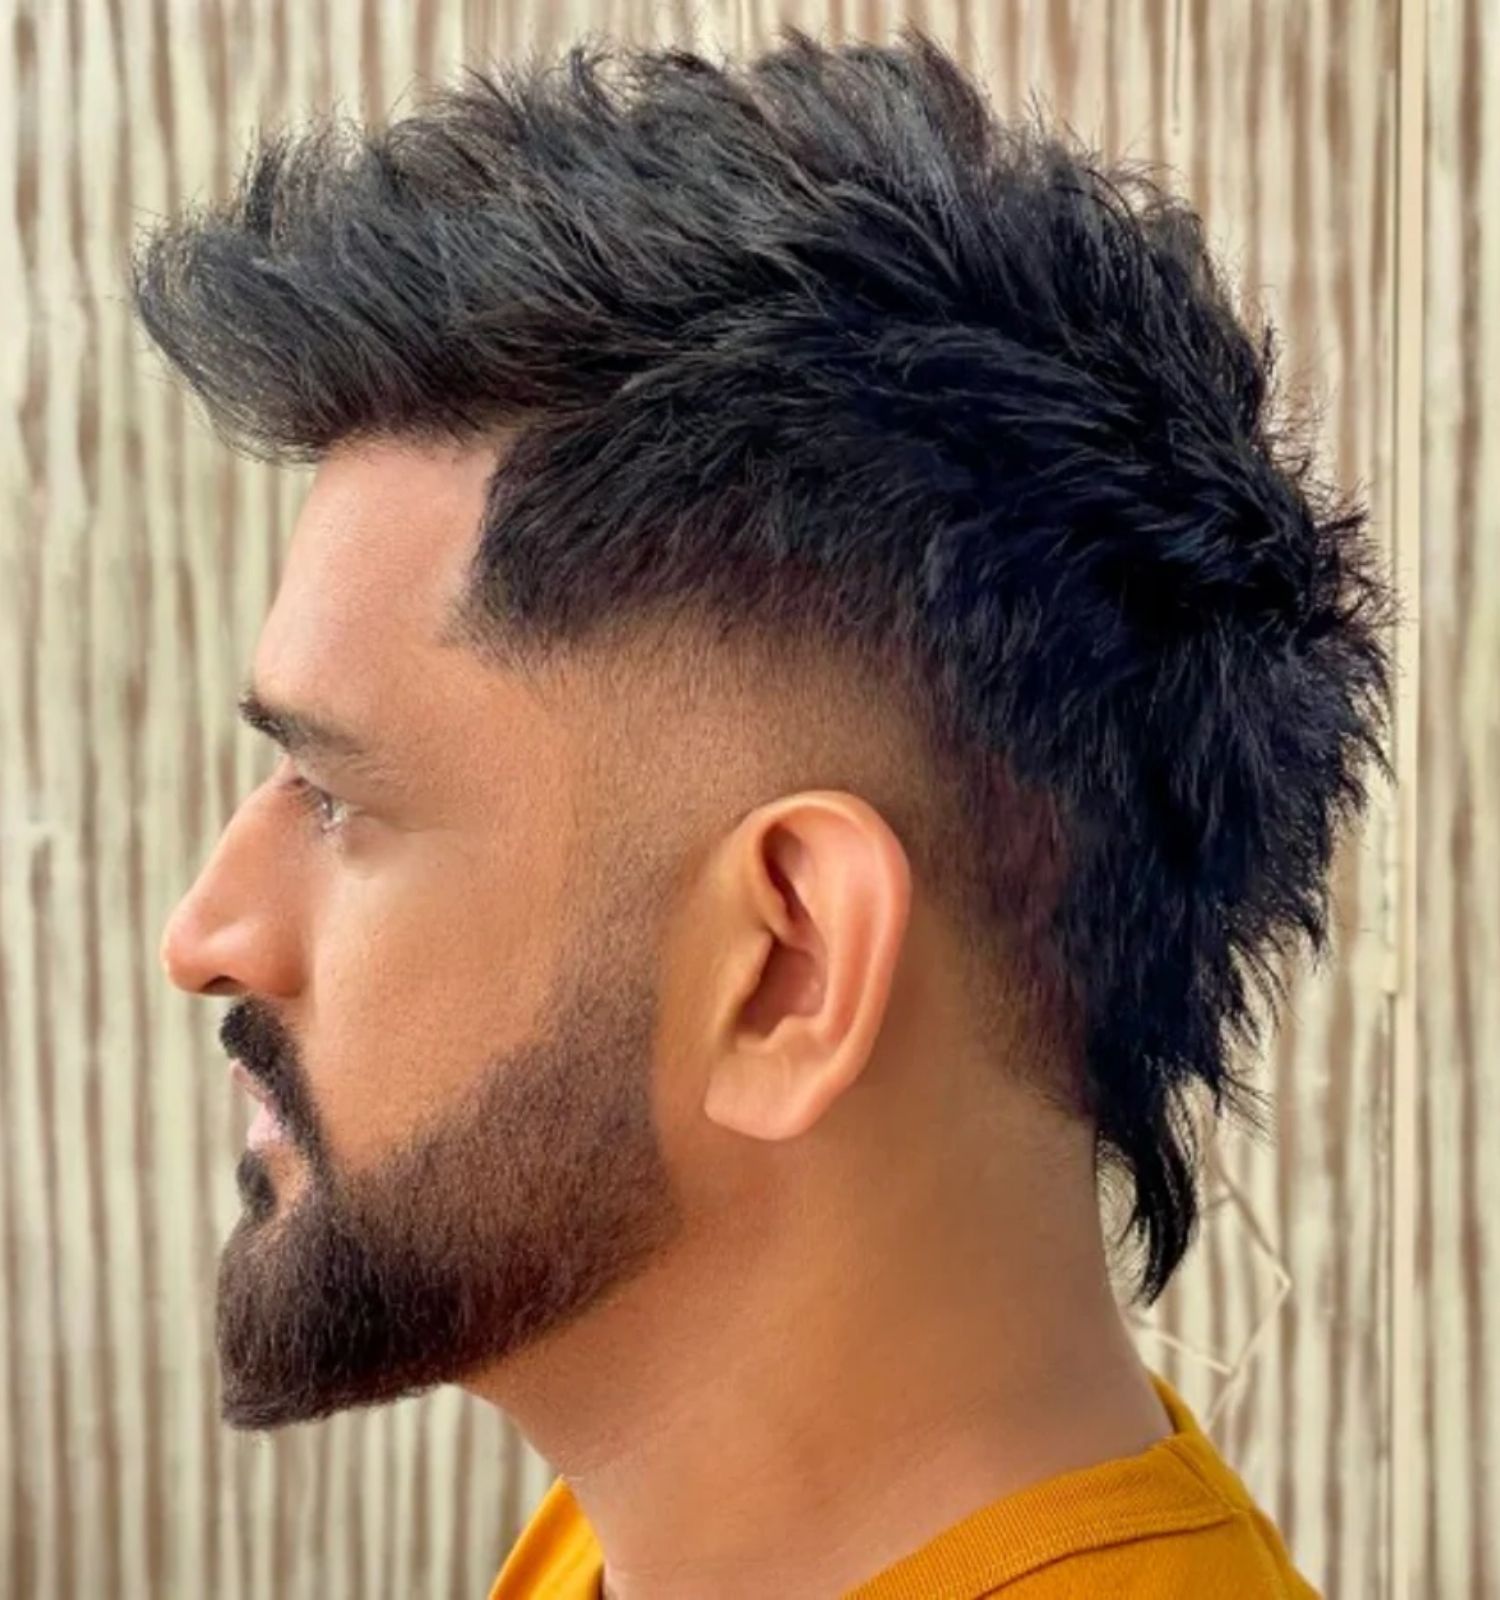 Virat Kohli Hairstyle and beard styles that raised his style quotient.